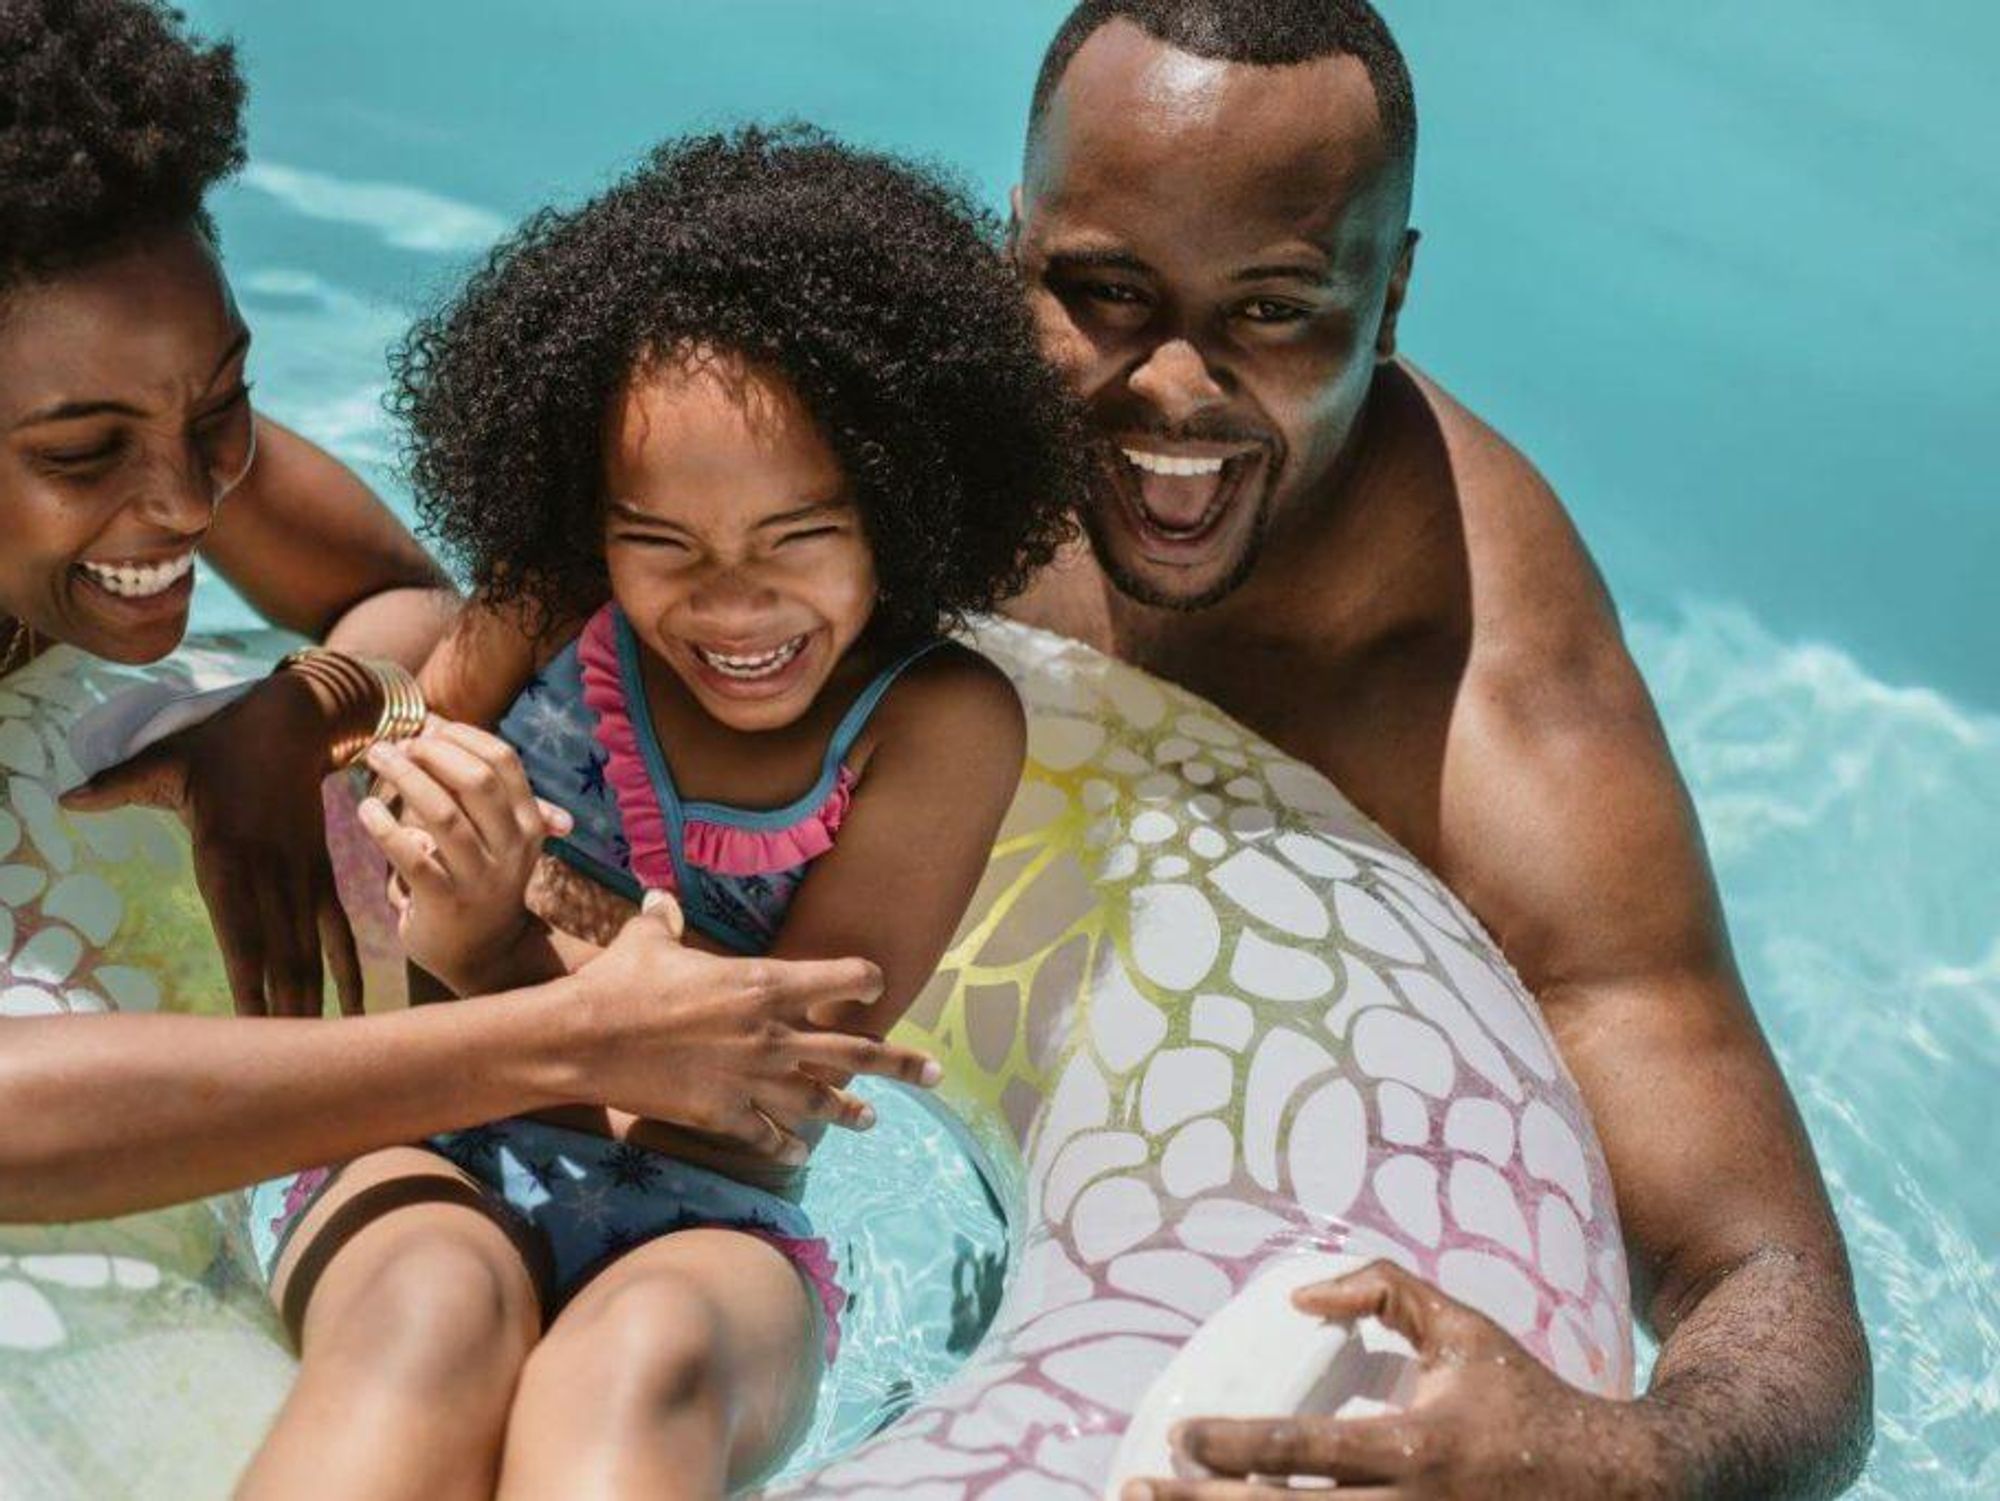 Two parents laugh while holding their child in a floating donut in a pool.